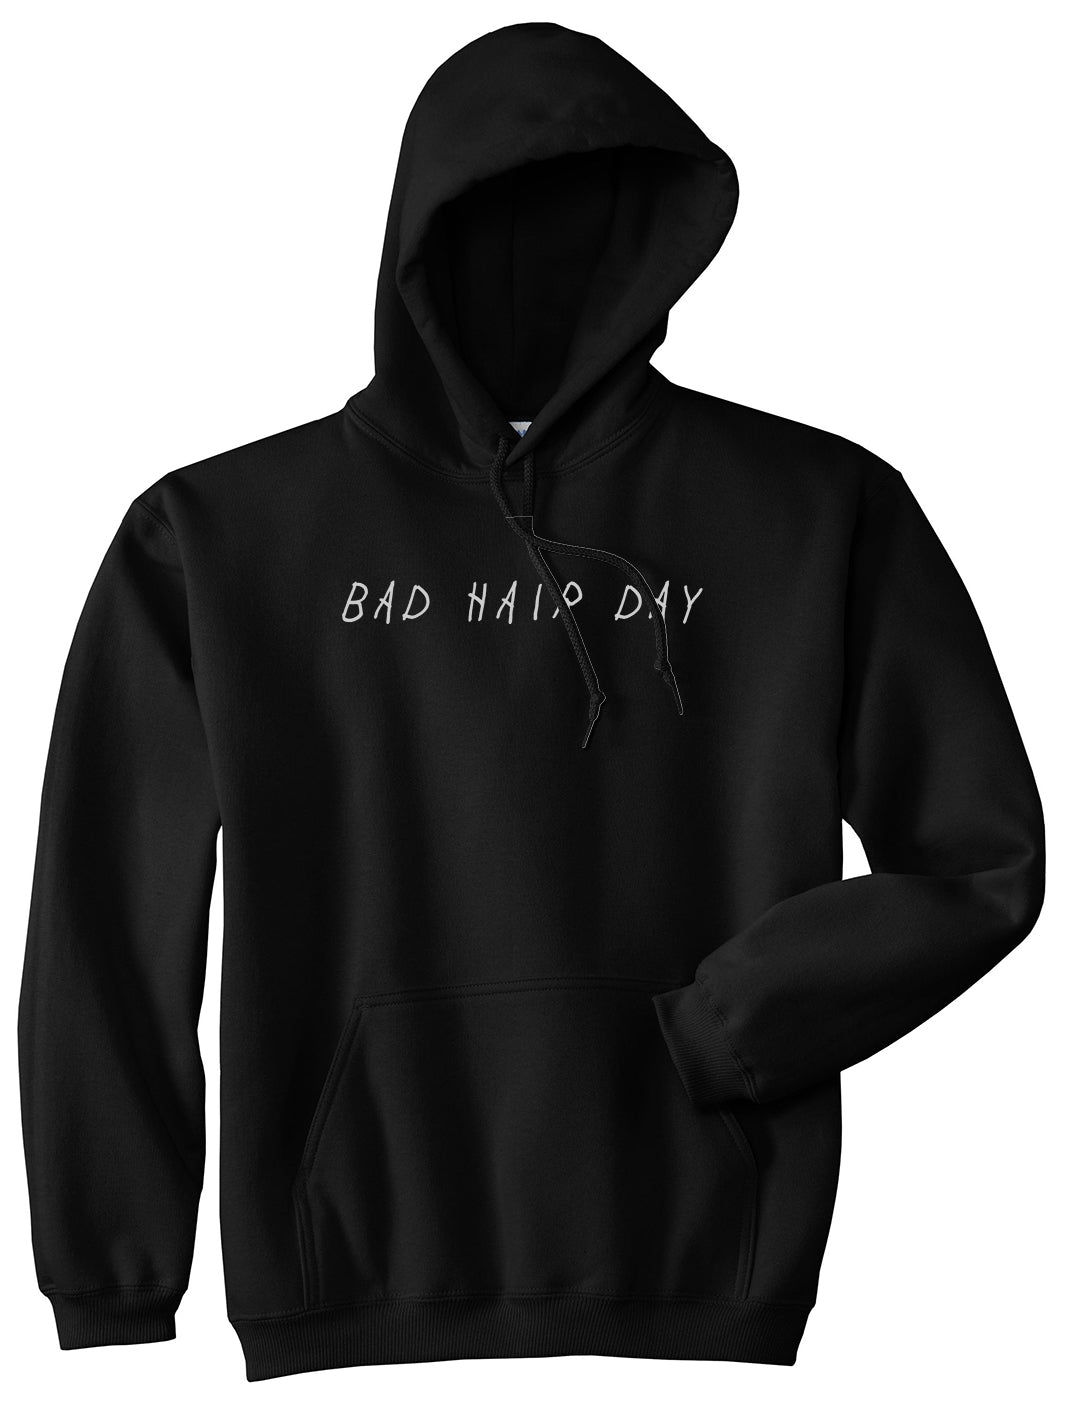 Bad Hair Day Black Pullover Hoodie by Kings Of NY